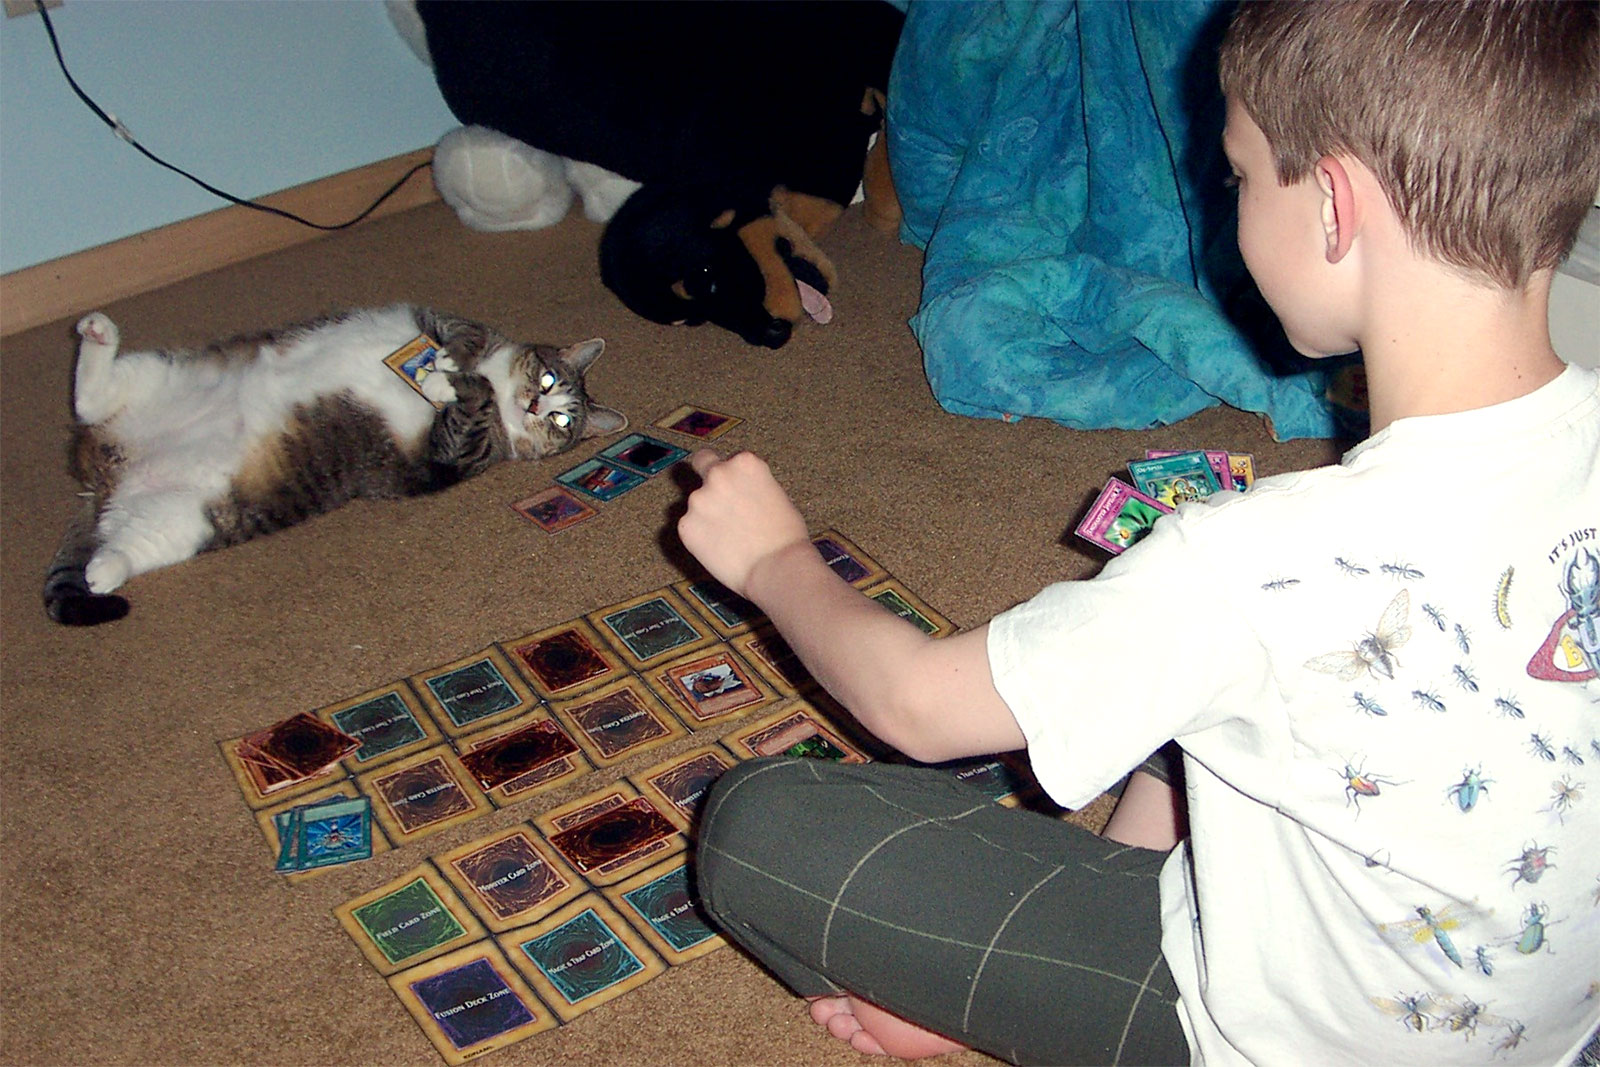 ... funny pictures of cute kids hanging out with animals, kids and animals